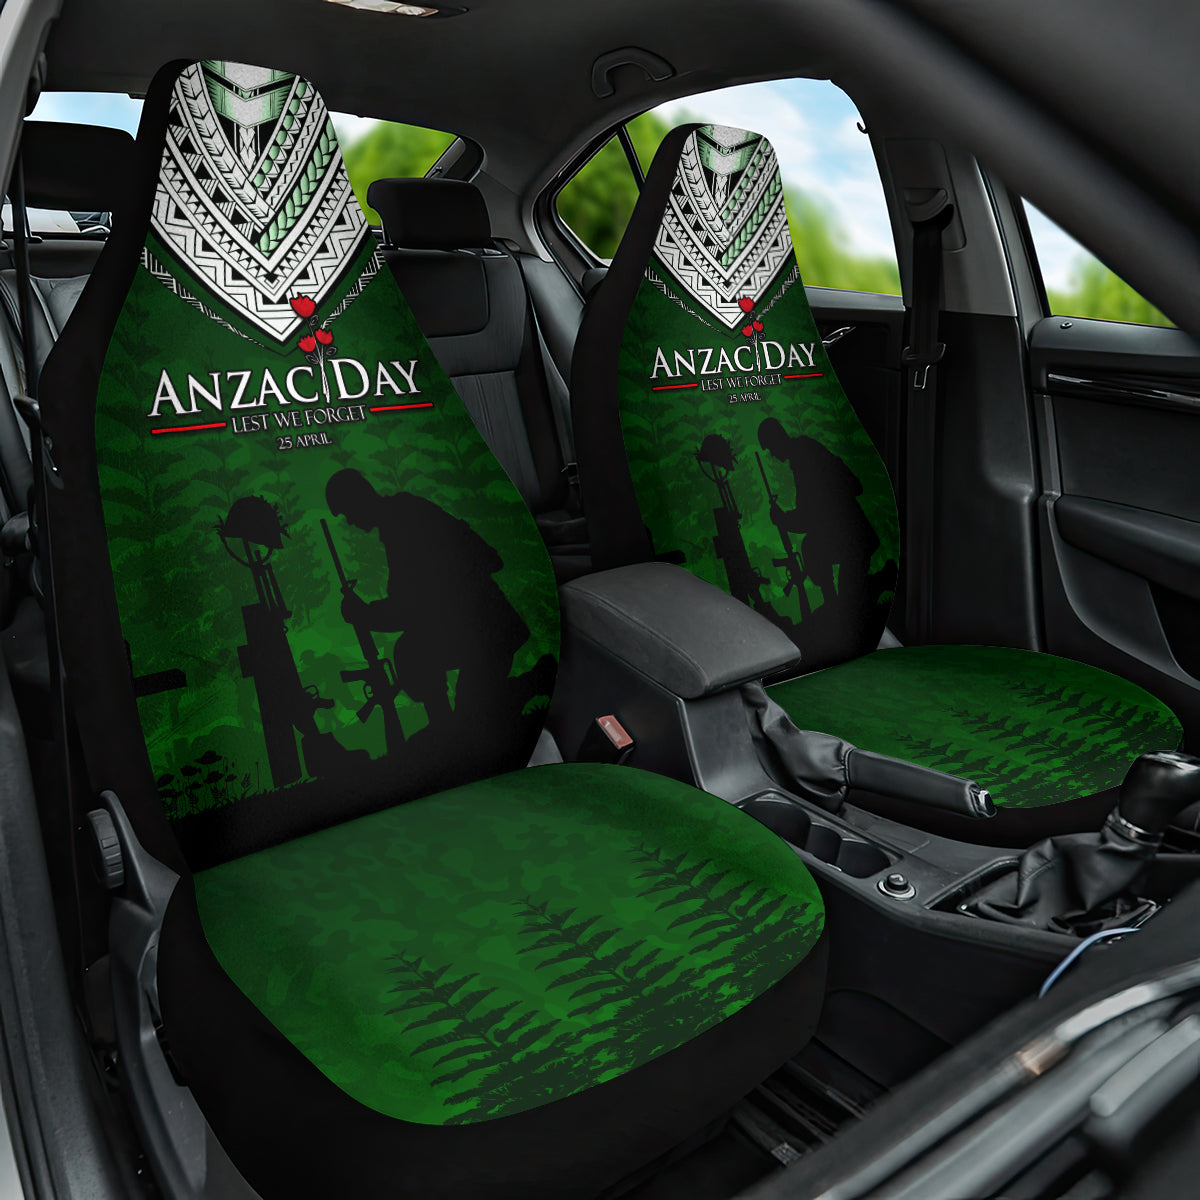 Norfolk Island ANZAC Day Car Seat Cover Soldier Lest We Forget Camouflage LT03 One Size Green - Polynesian Pride